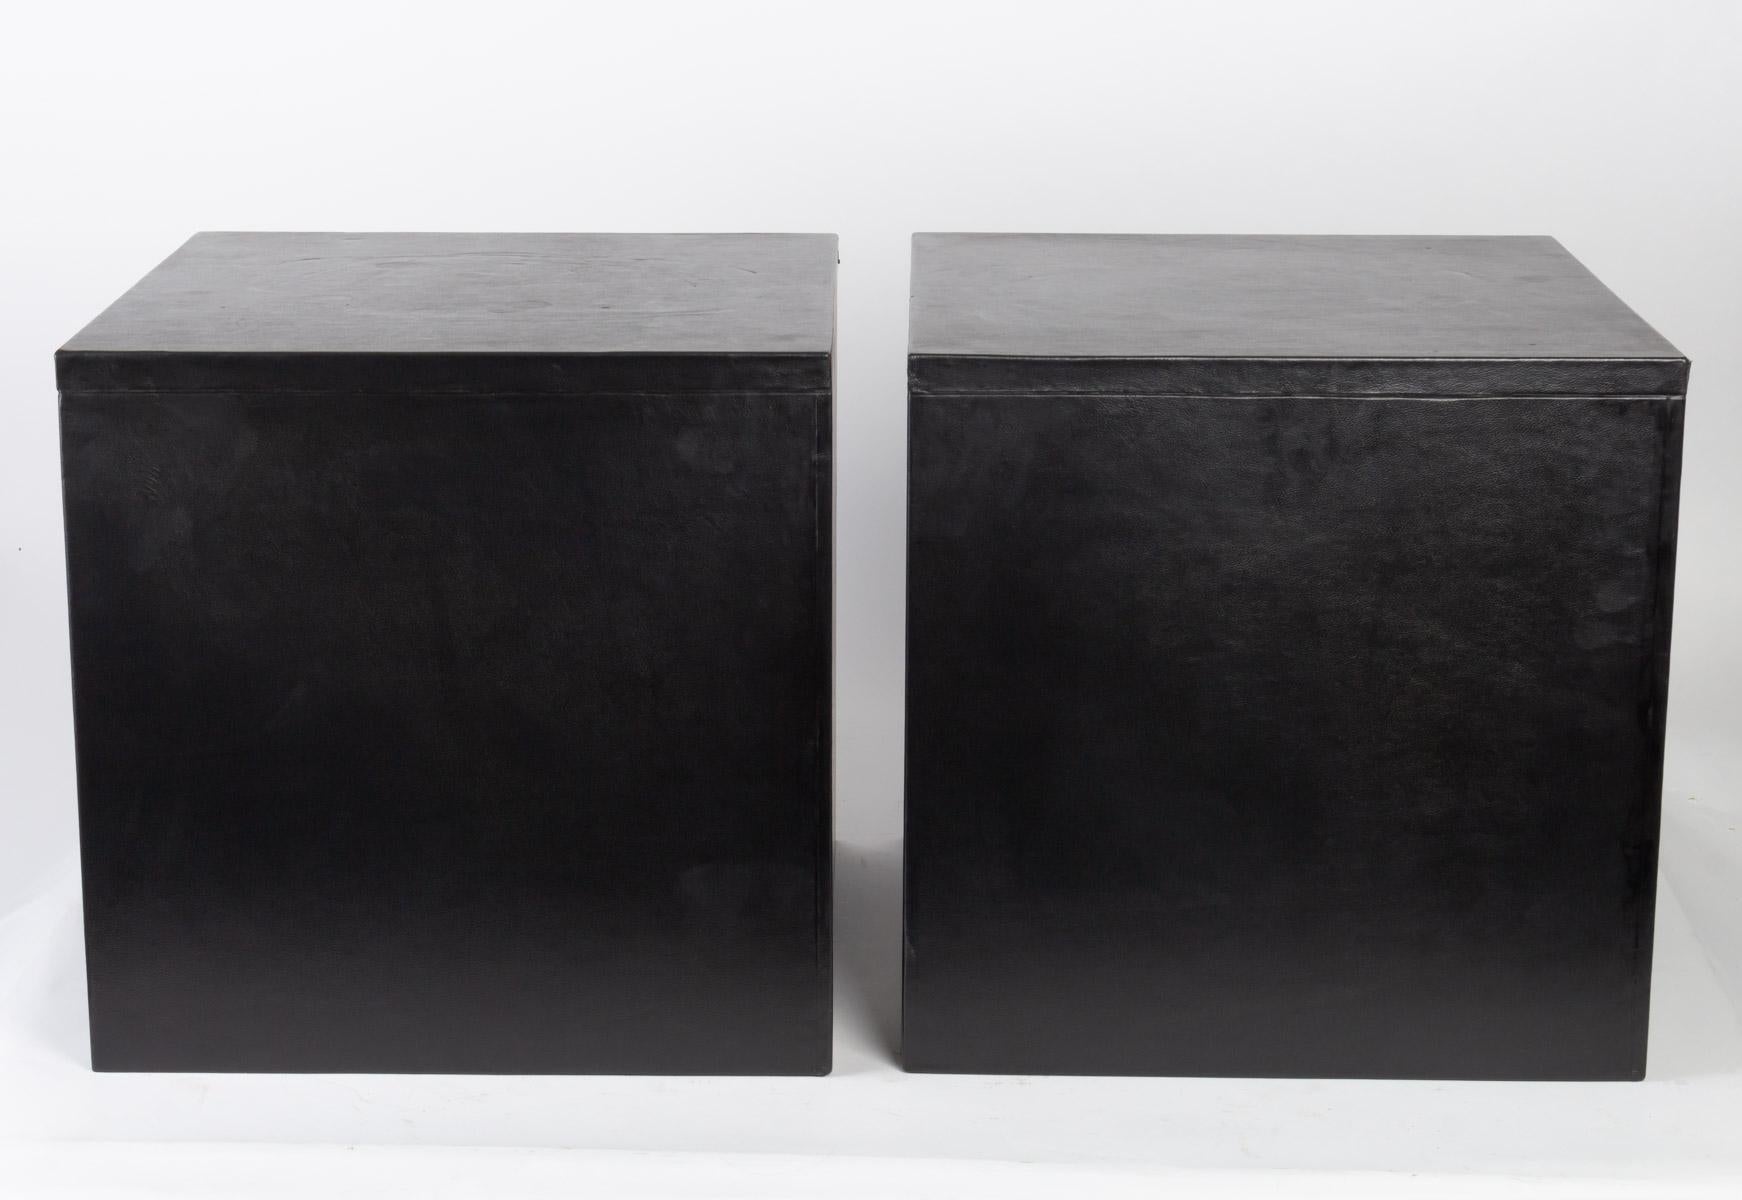 Pair of wooden bases covered with black leather.

Measures: H 40 cm, W 41 cm, D 44 cm.